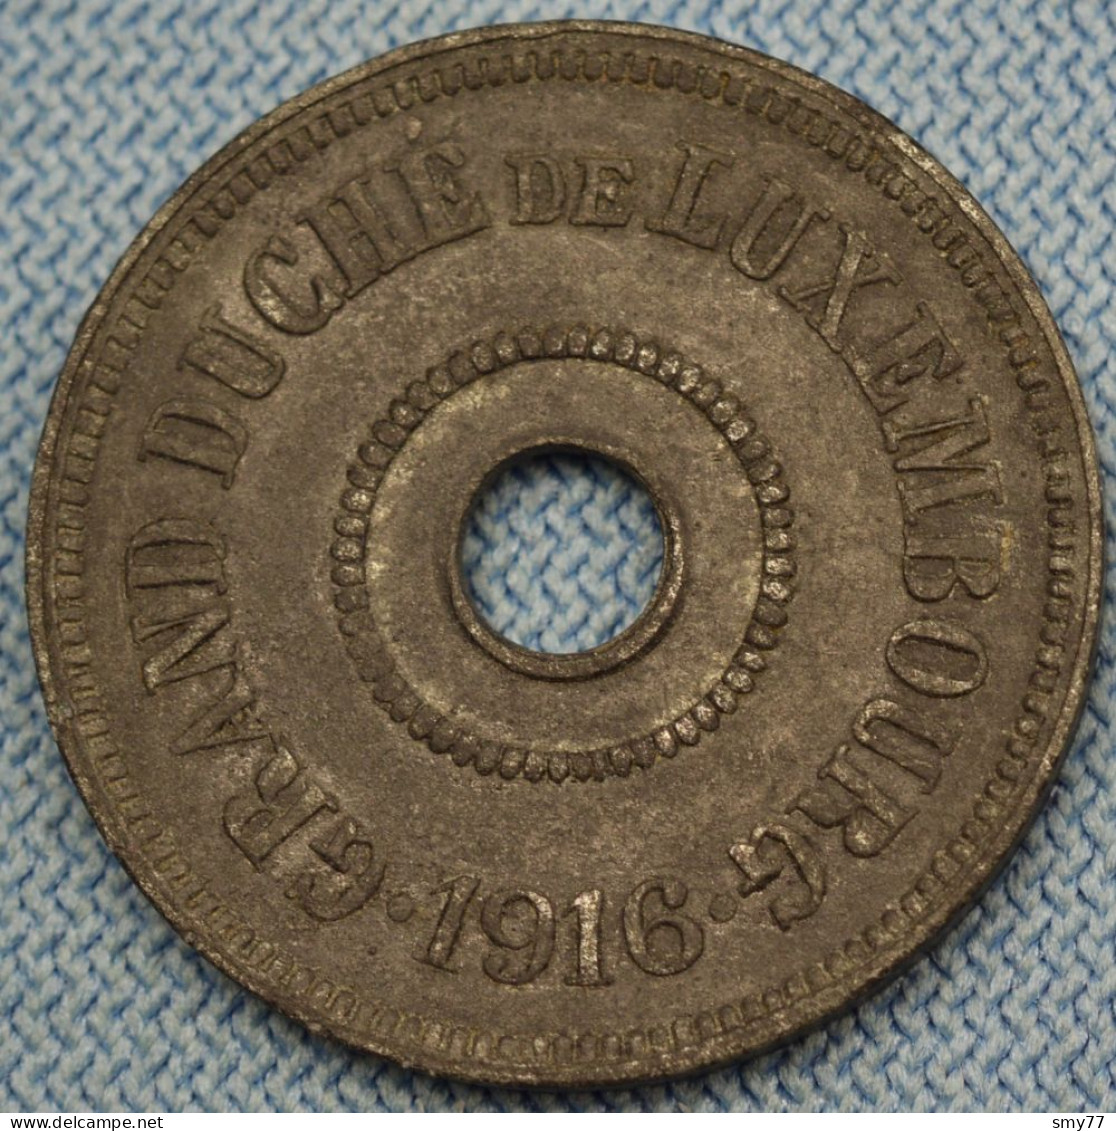 Luxembourg • 25 Centimes 1916  •  Marie-Adelaïde • Luxemburg •  [24-584] - Luxembourg